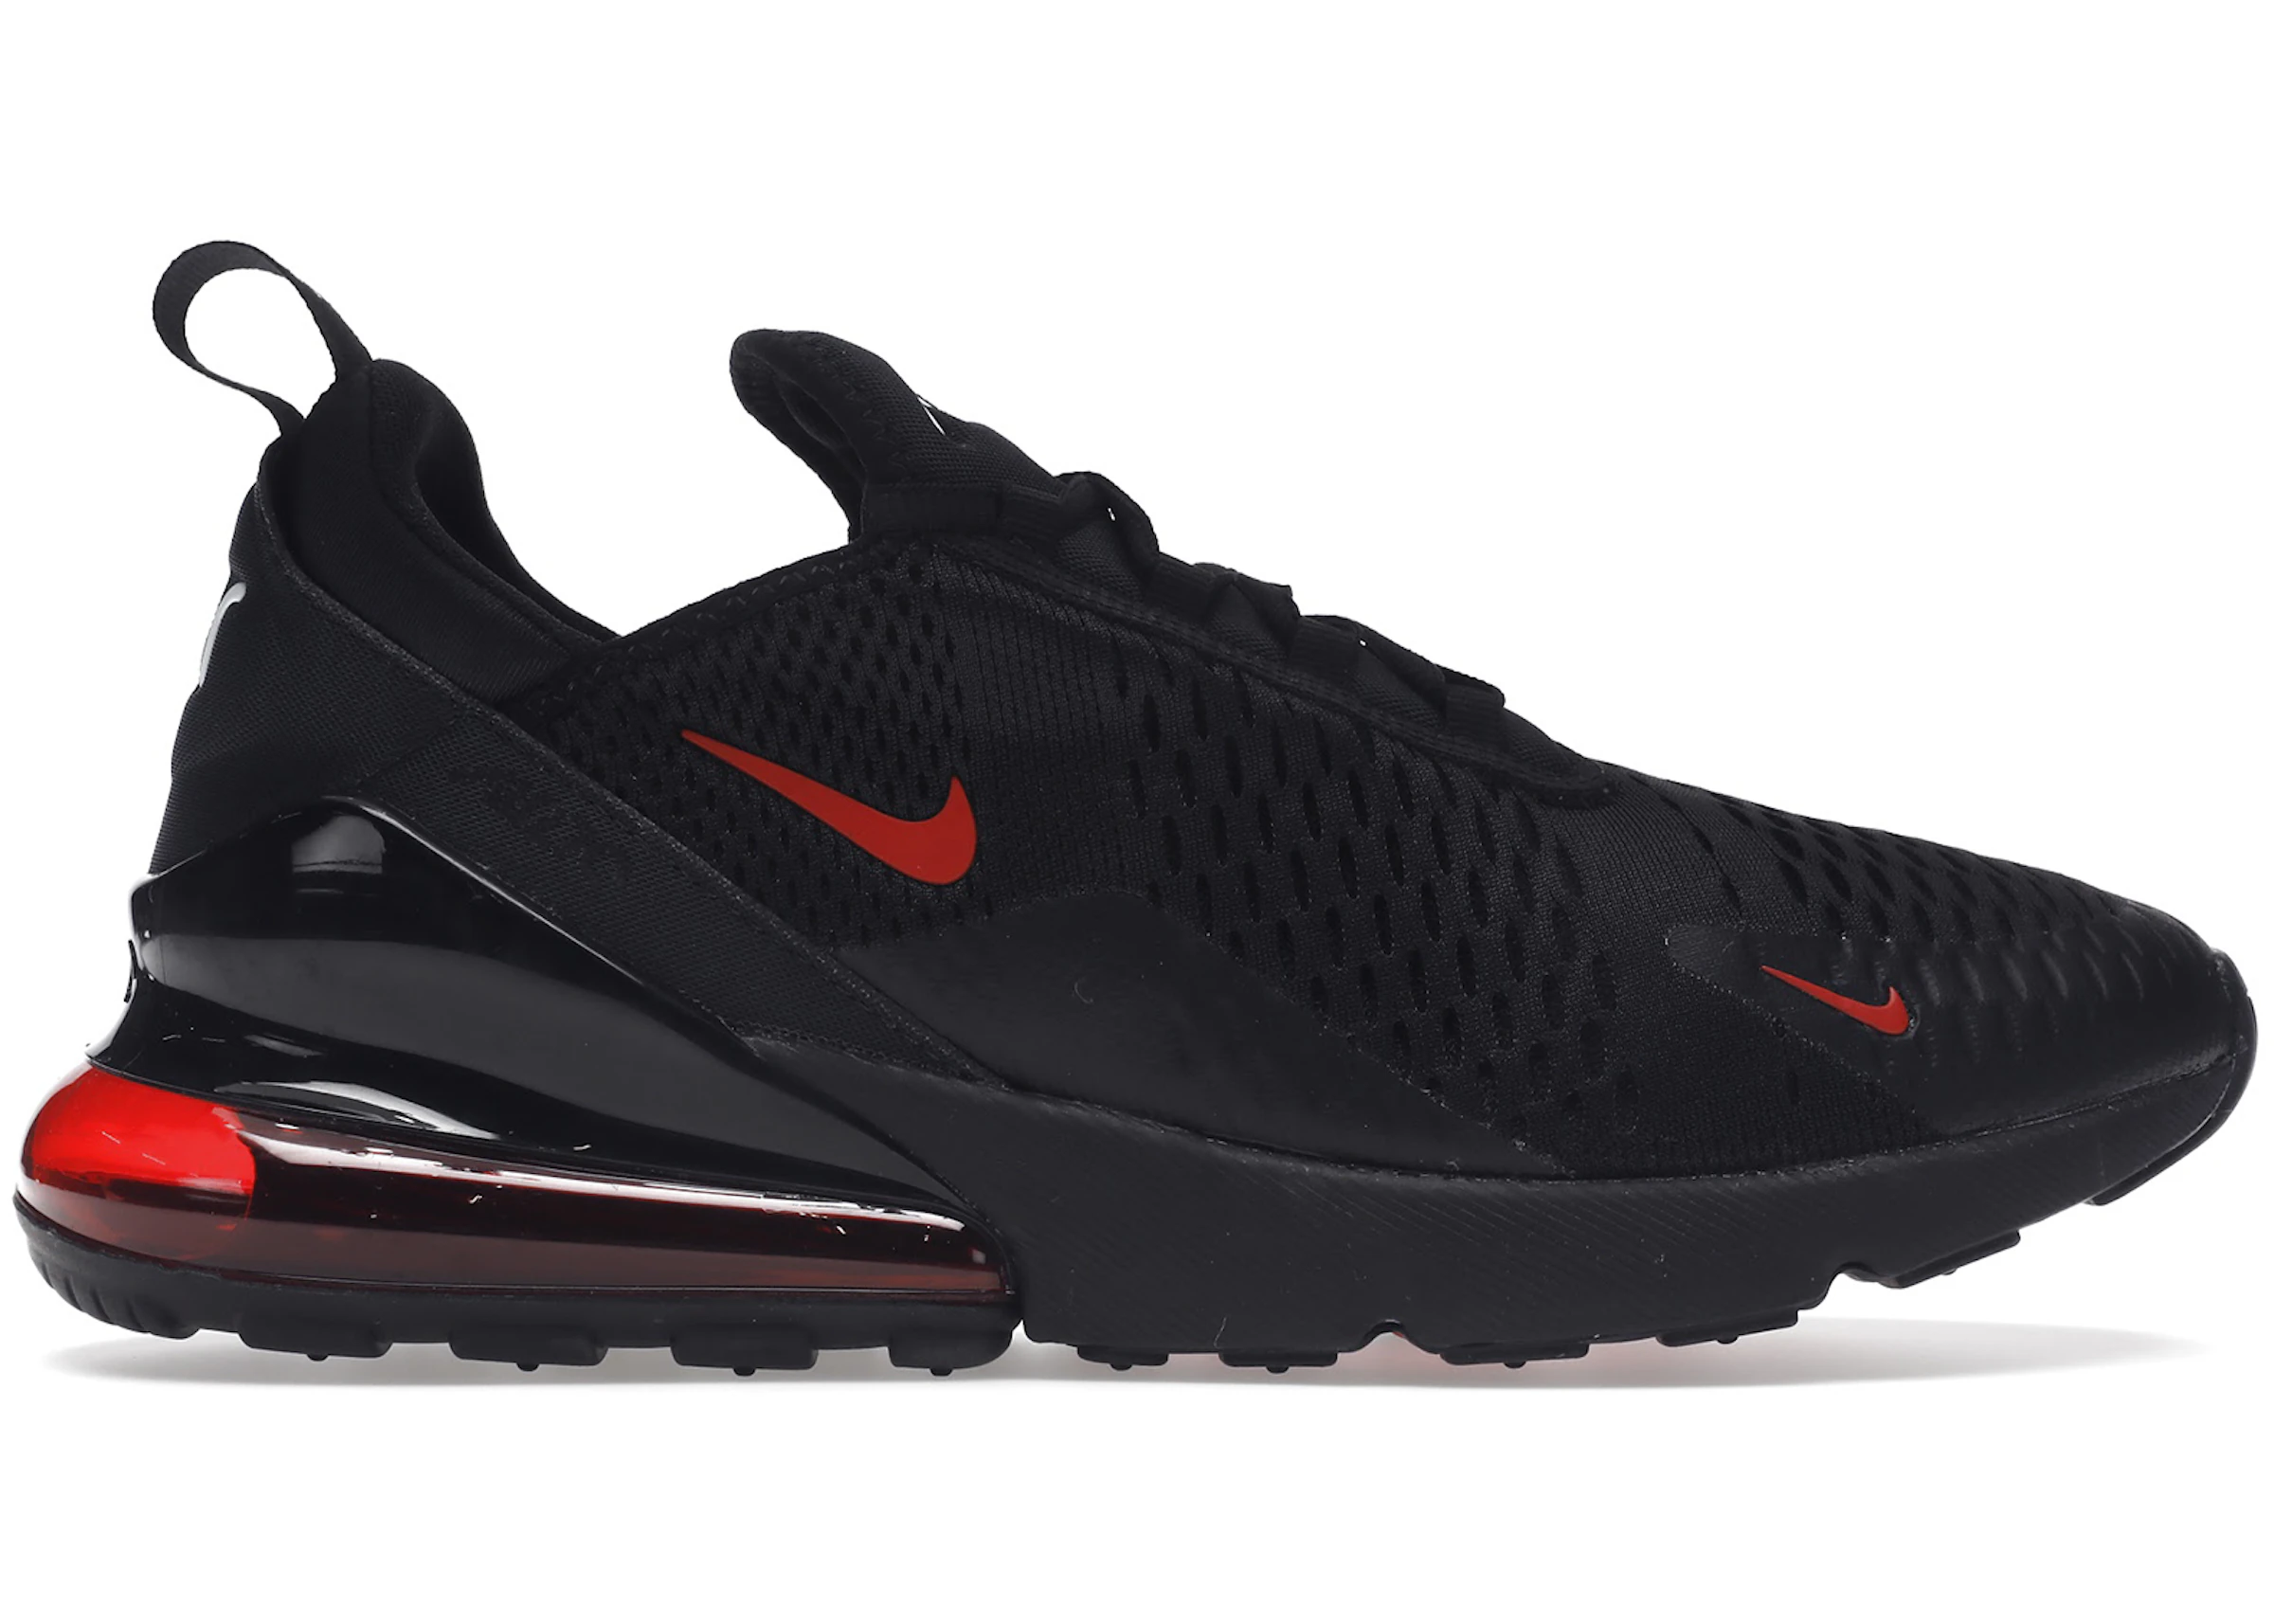 Buy red 270 Nike Air Max 270 Shoes & New Sneakers - StockX